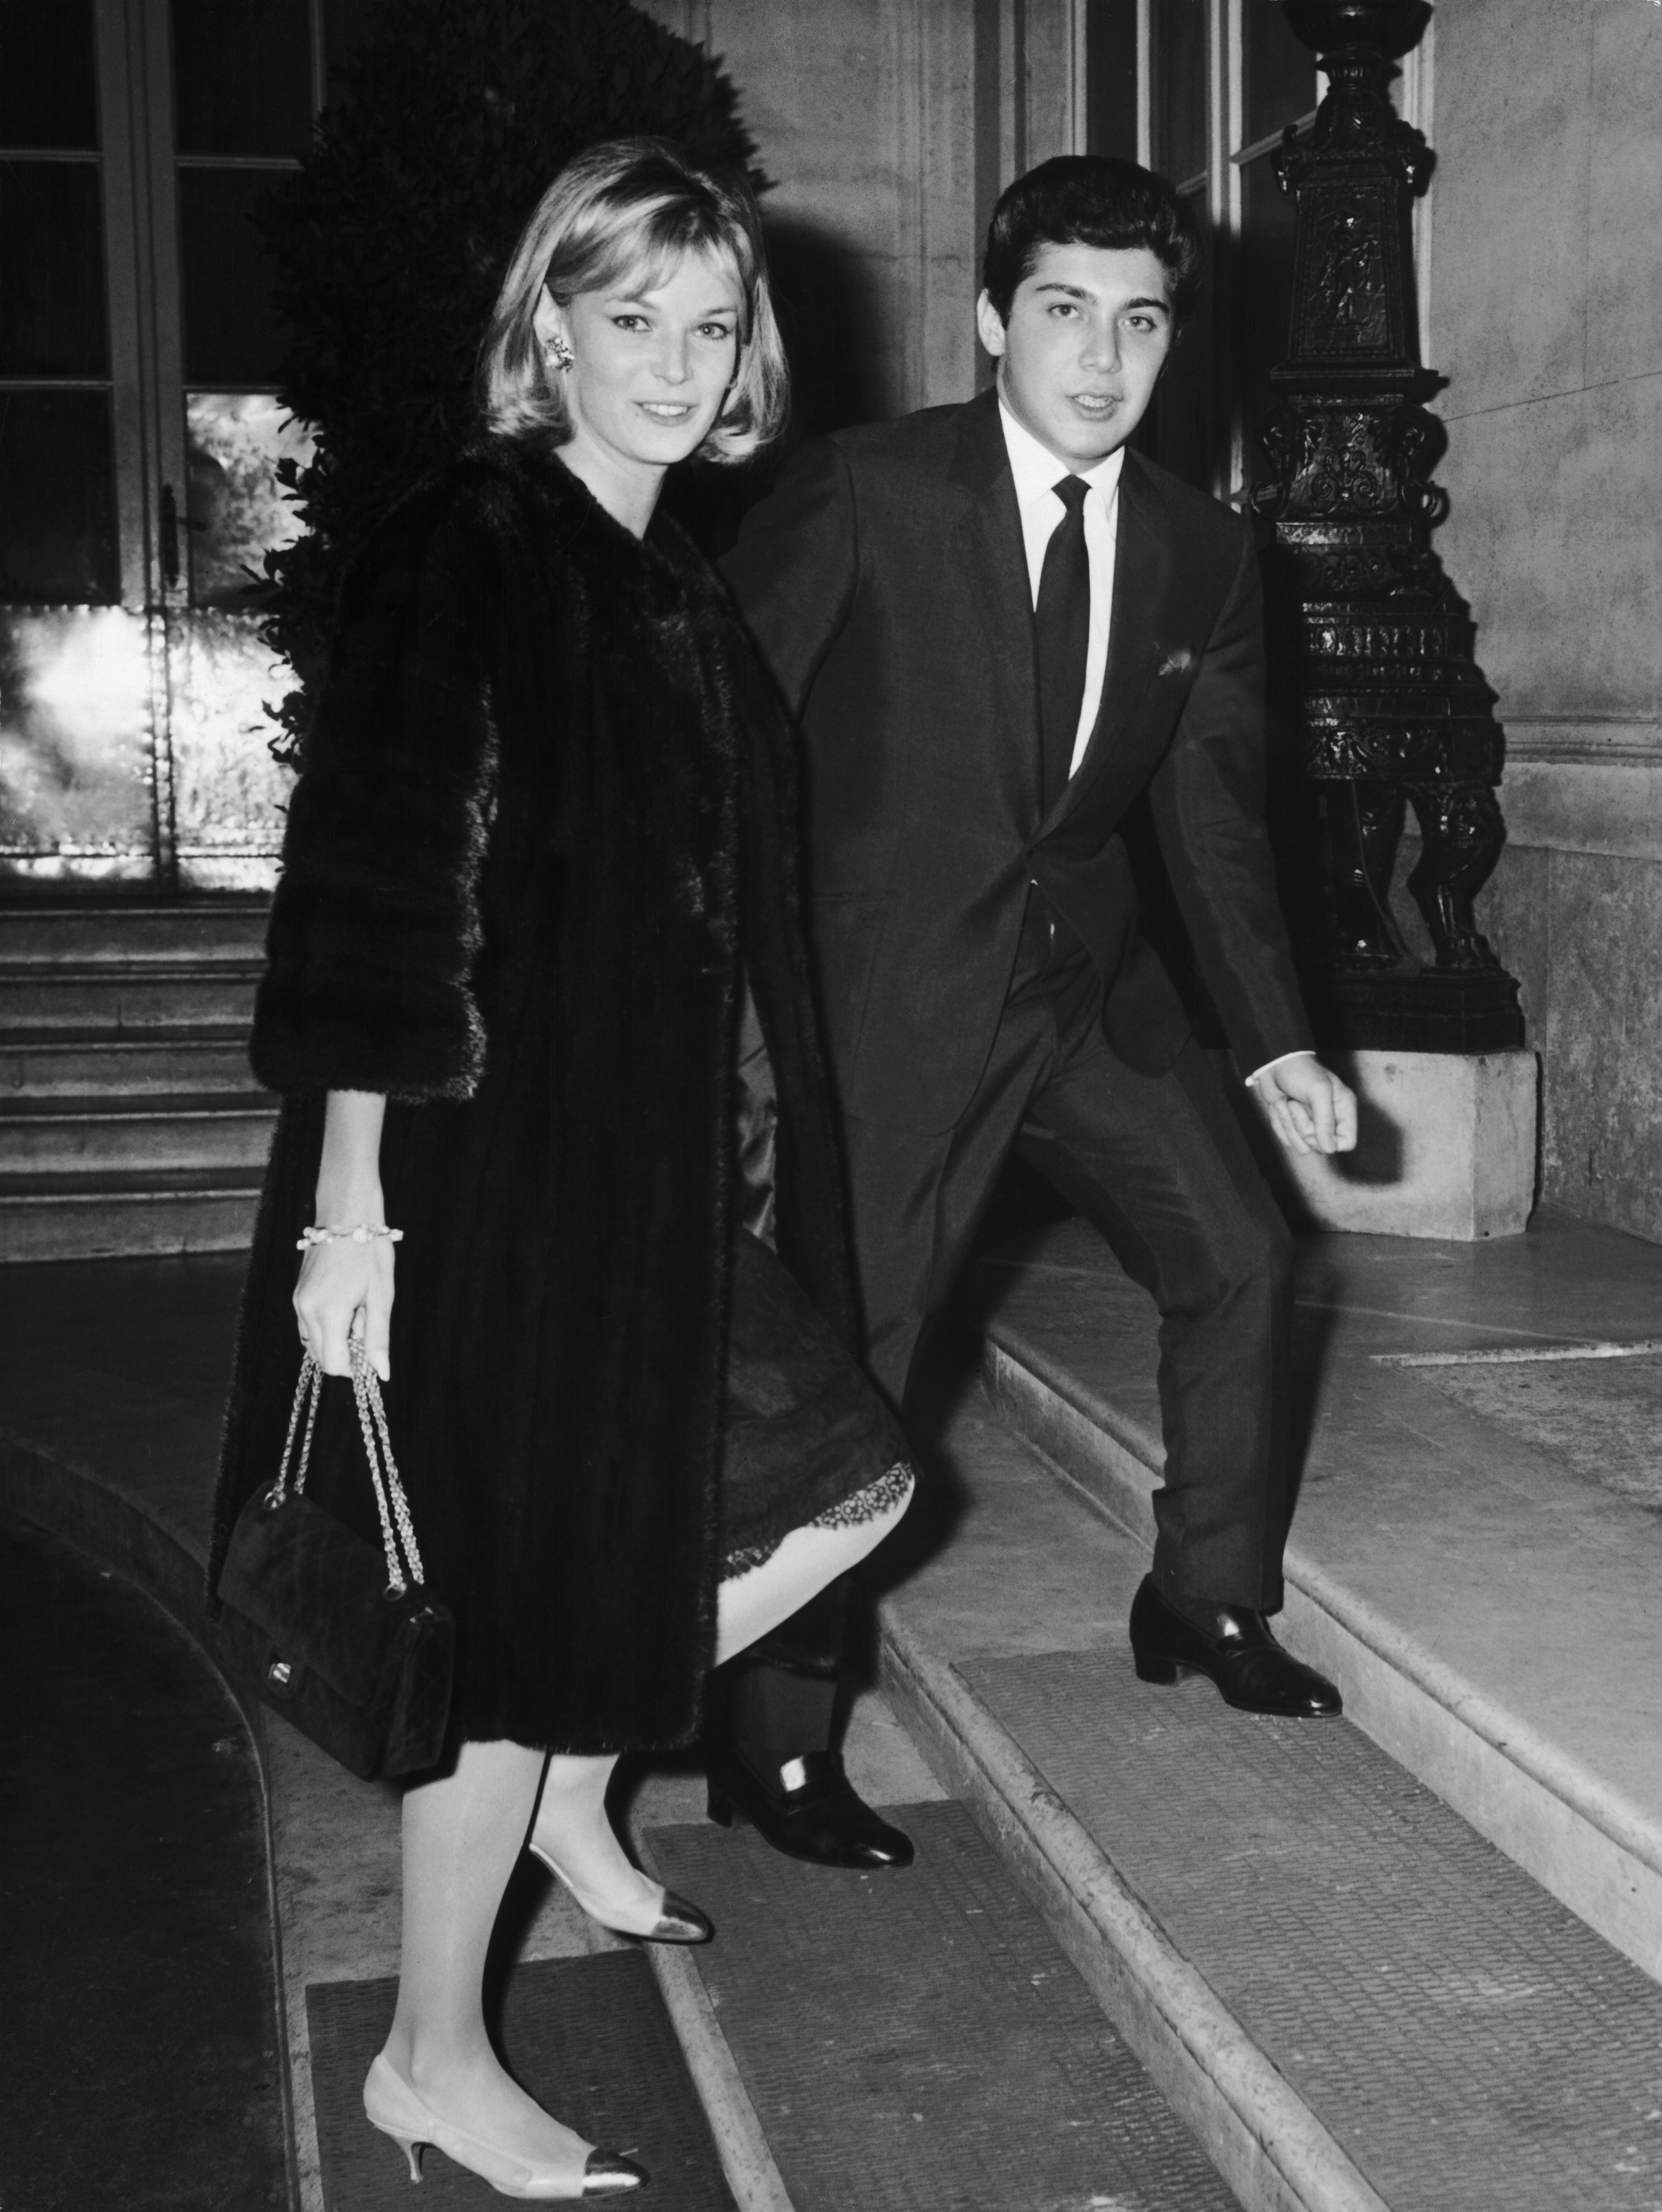  Paul Anka, Singer, and his wife, Anne De Zogheb. Rome. Via Veneto. October 1963. | Source: Getty Images